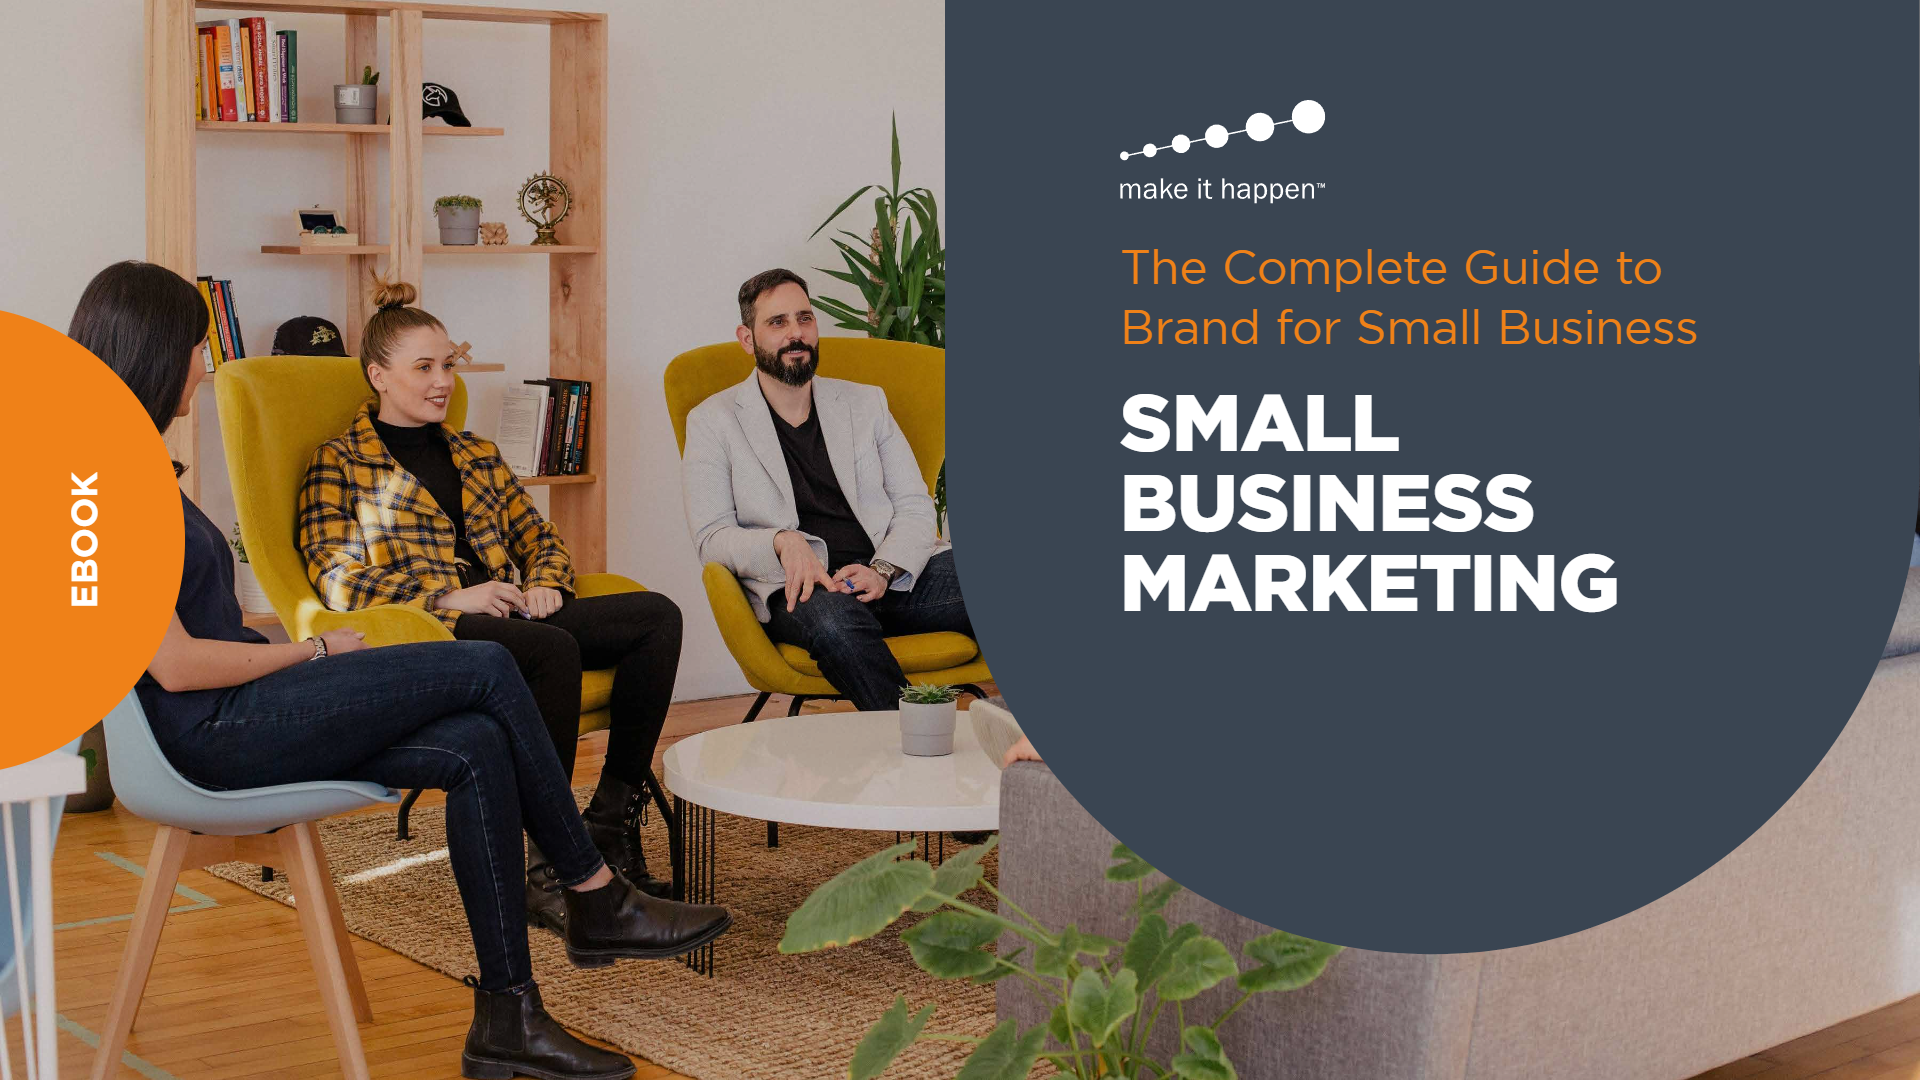 The Complete Guide to Brand for Small Business